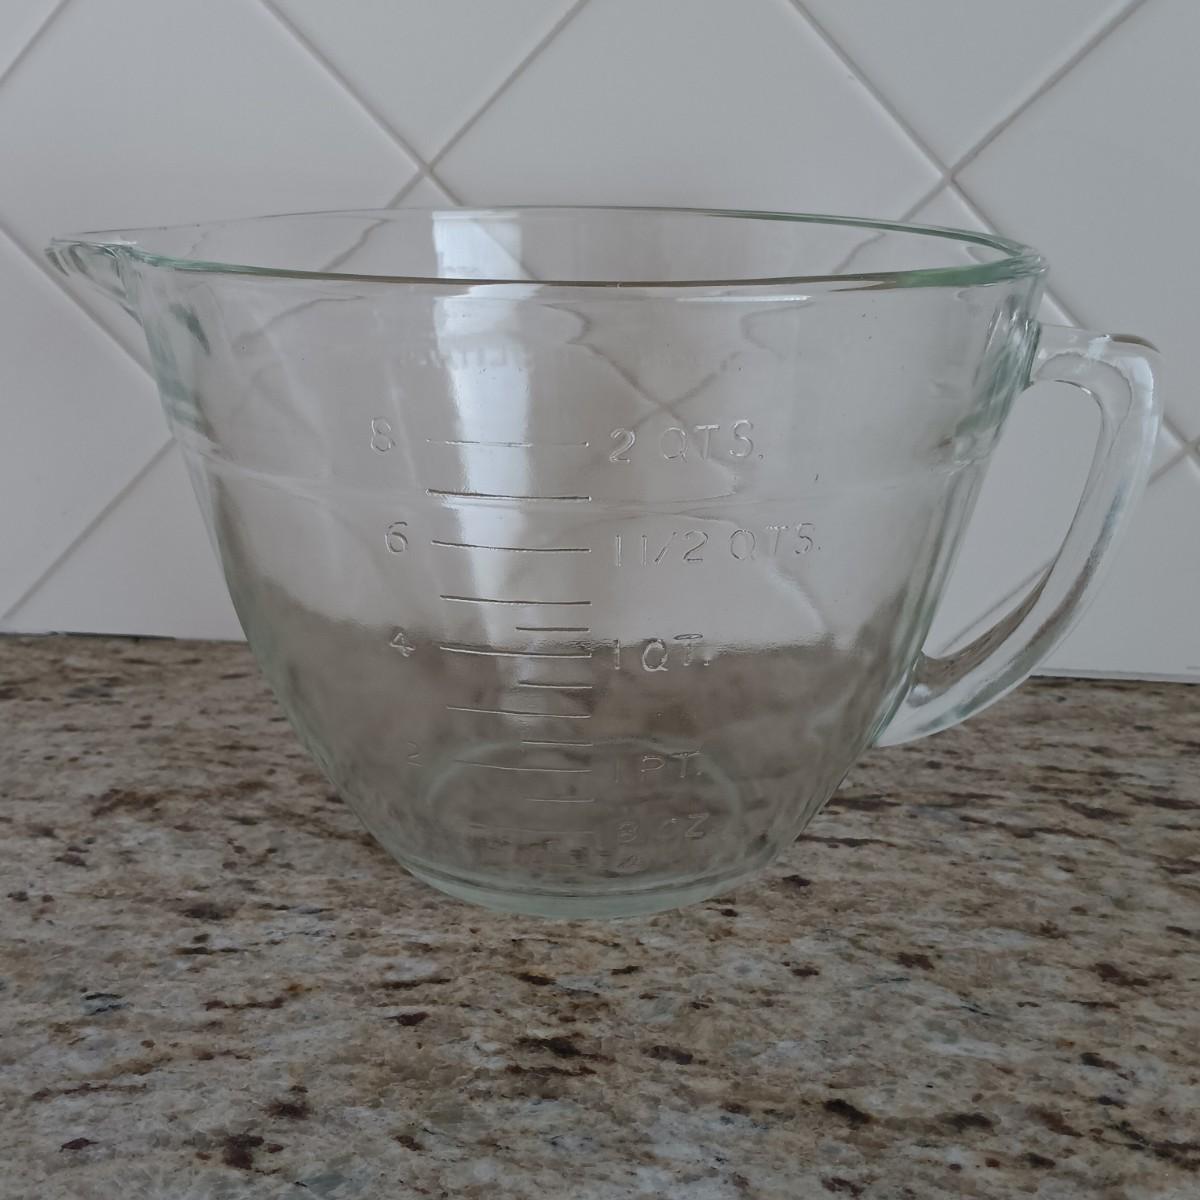 Sold at Auction: Lot of 3 Heavy Glass Measuring Cups Pyrex and